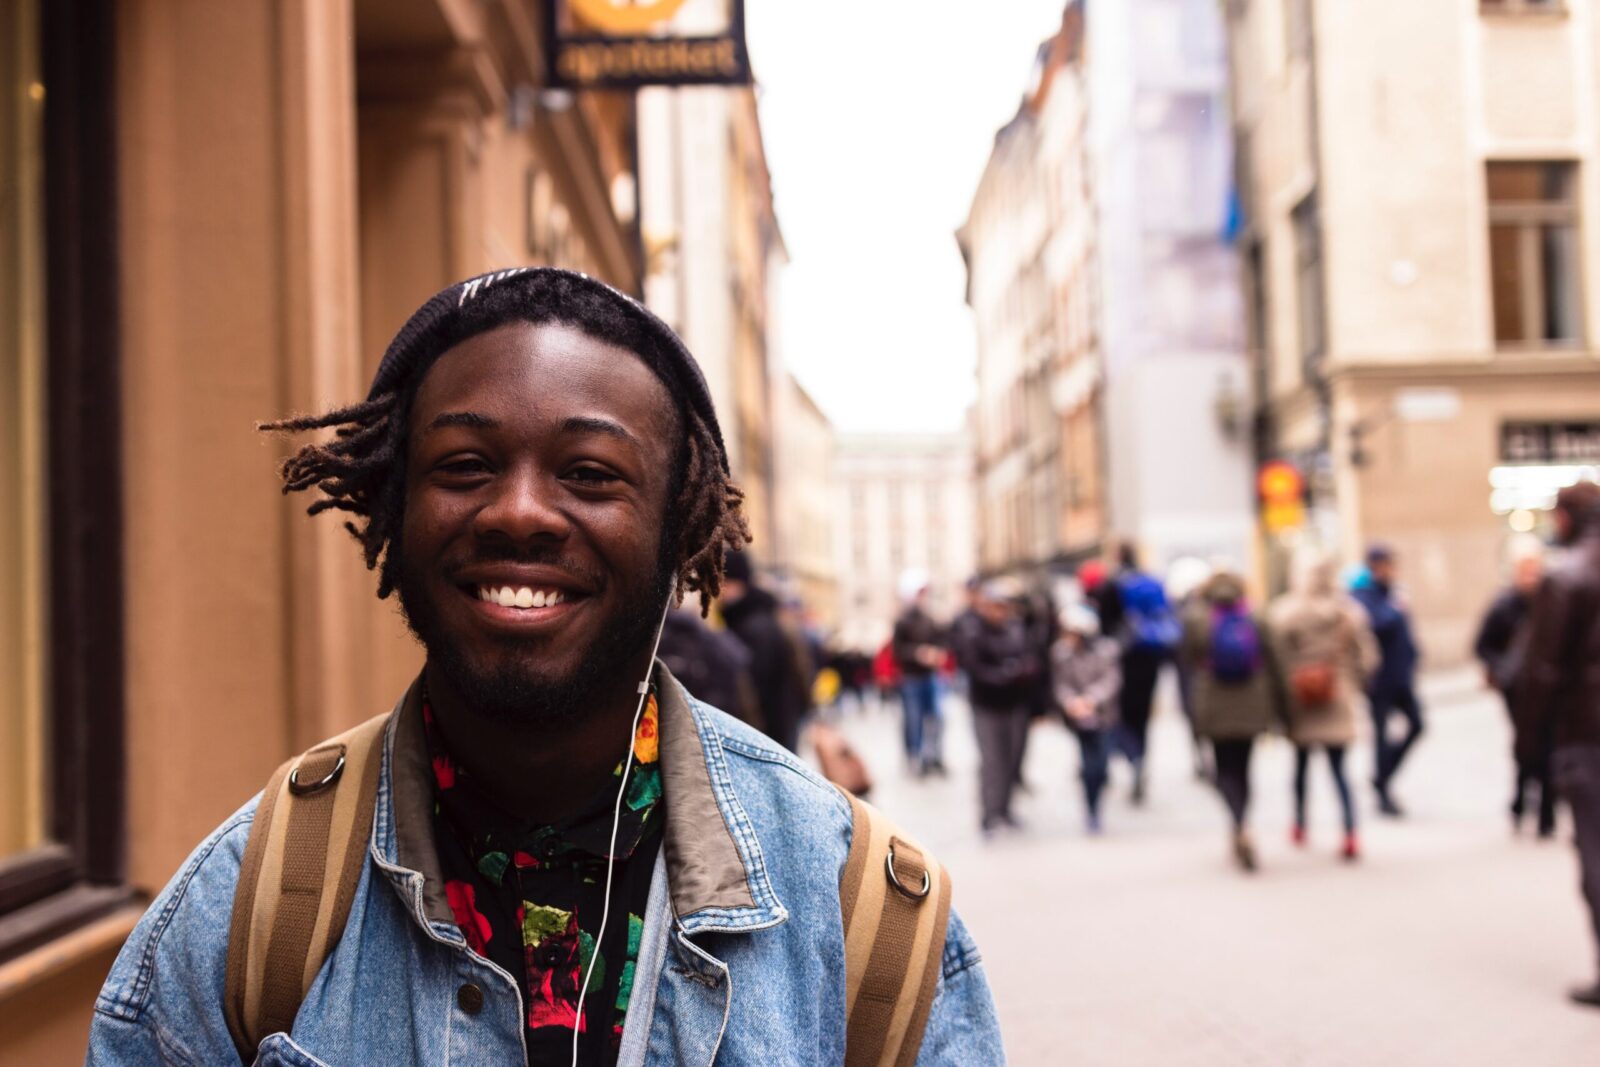 student smiling with headphones on in the street